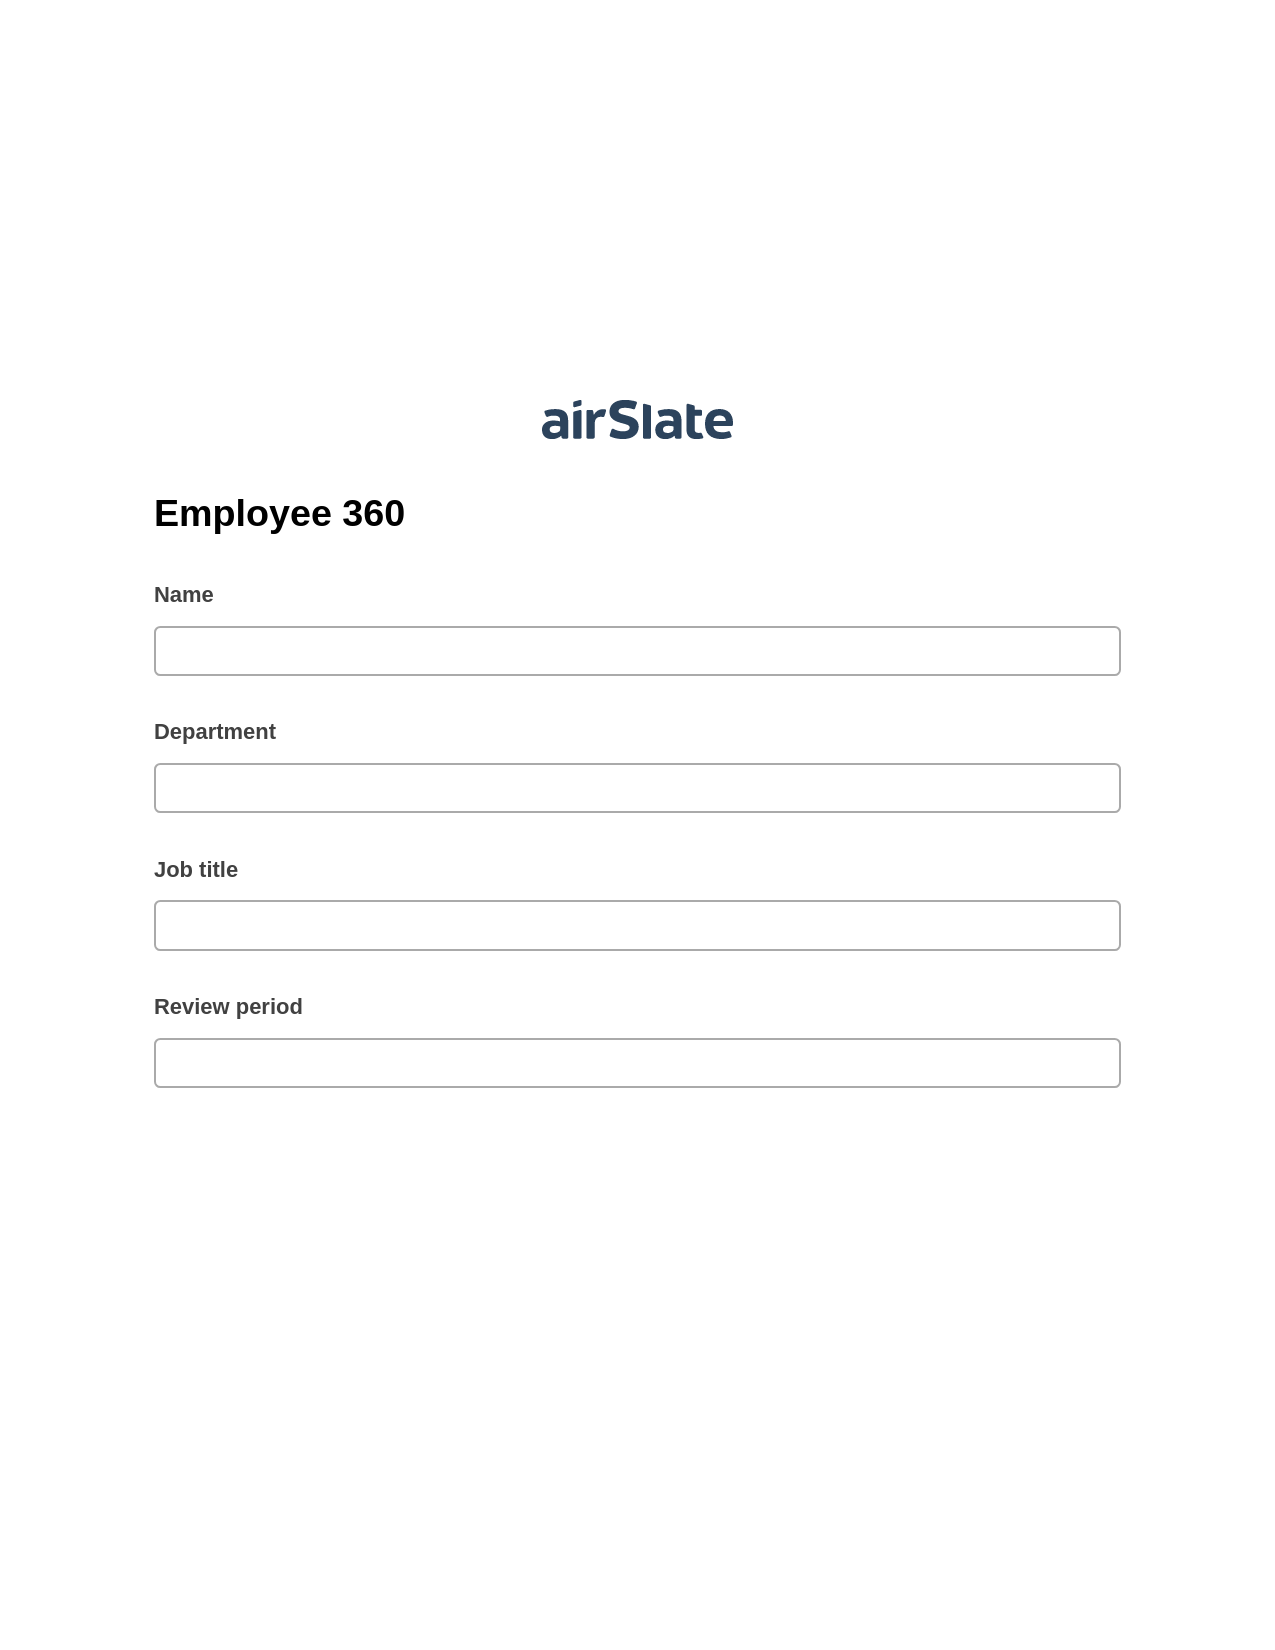 Employee 360 Pre-fill Document Bot, Invoke Salesforce Process Bot, Export to Excel 365 Bot